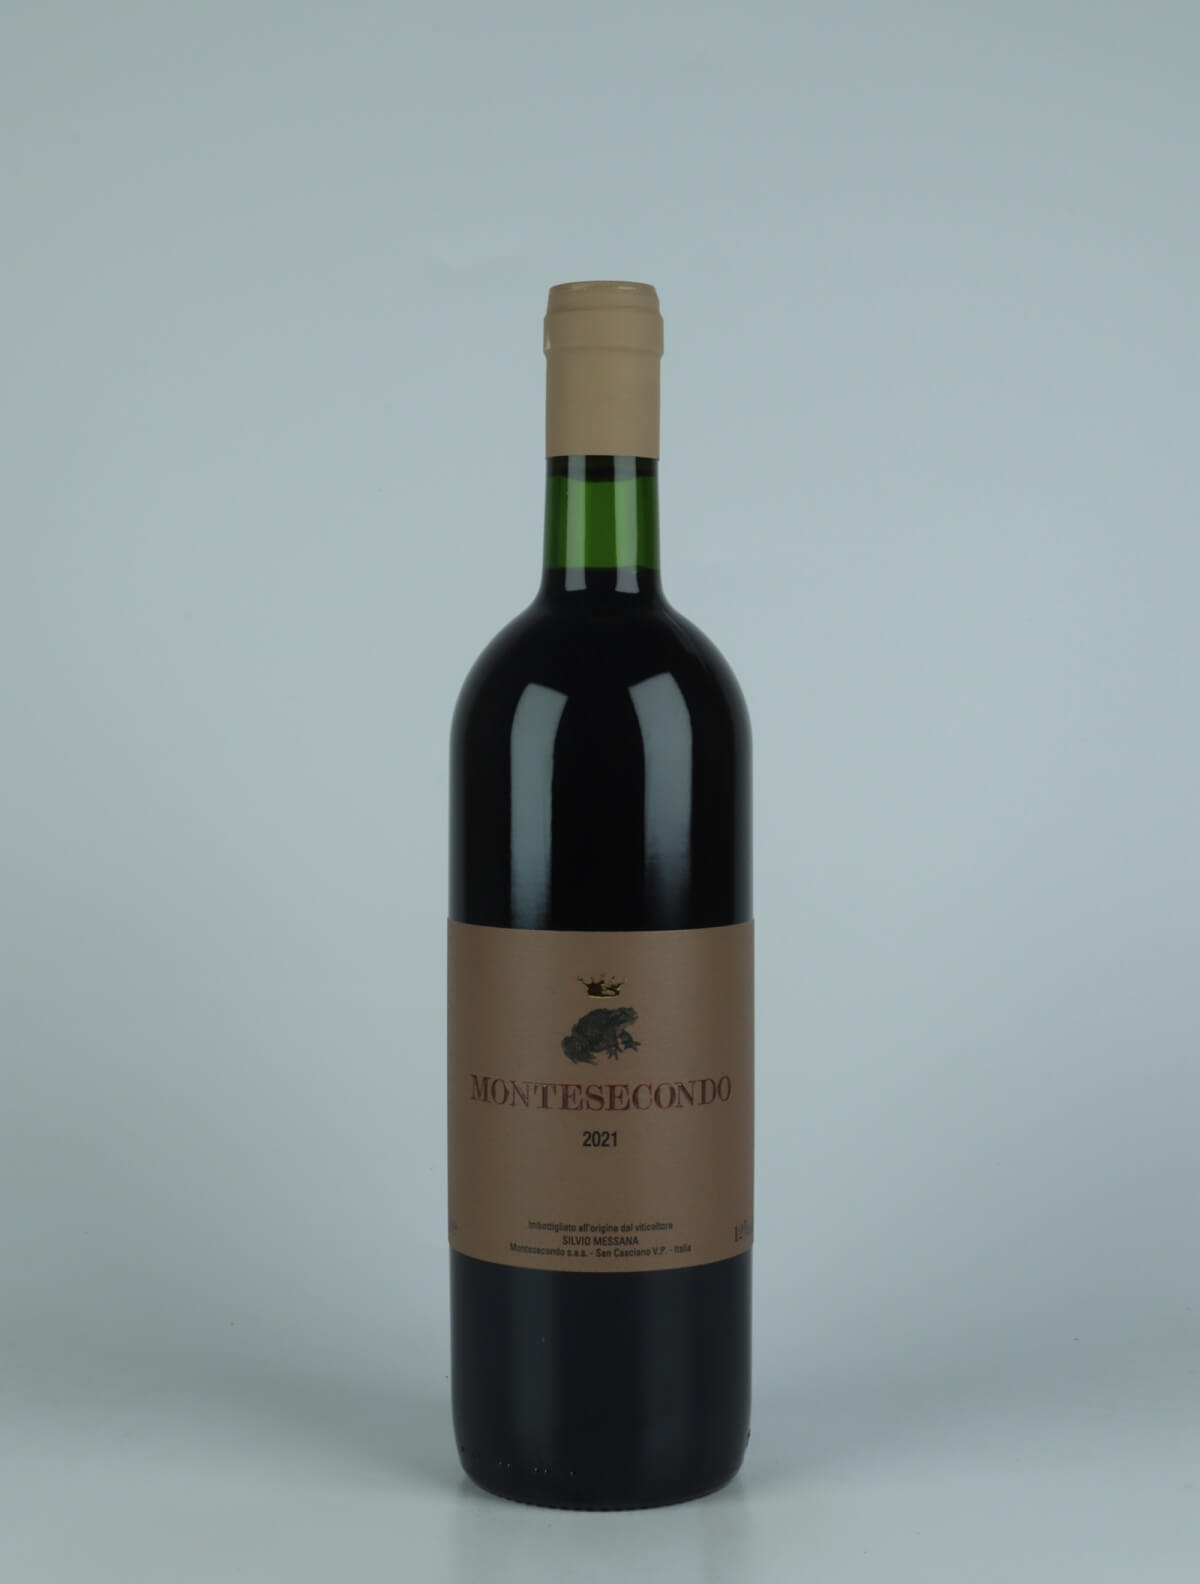 A bottle 2021 Sangiovese Red wine from Montesecondo, Tuscany in Italy